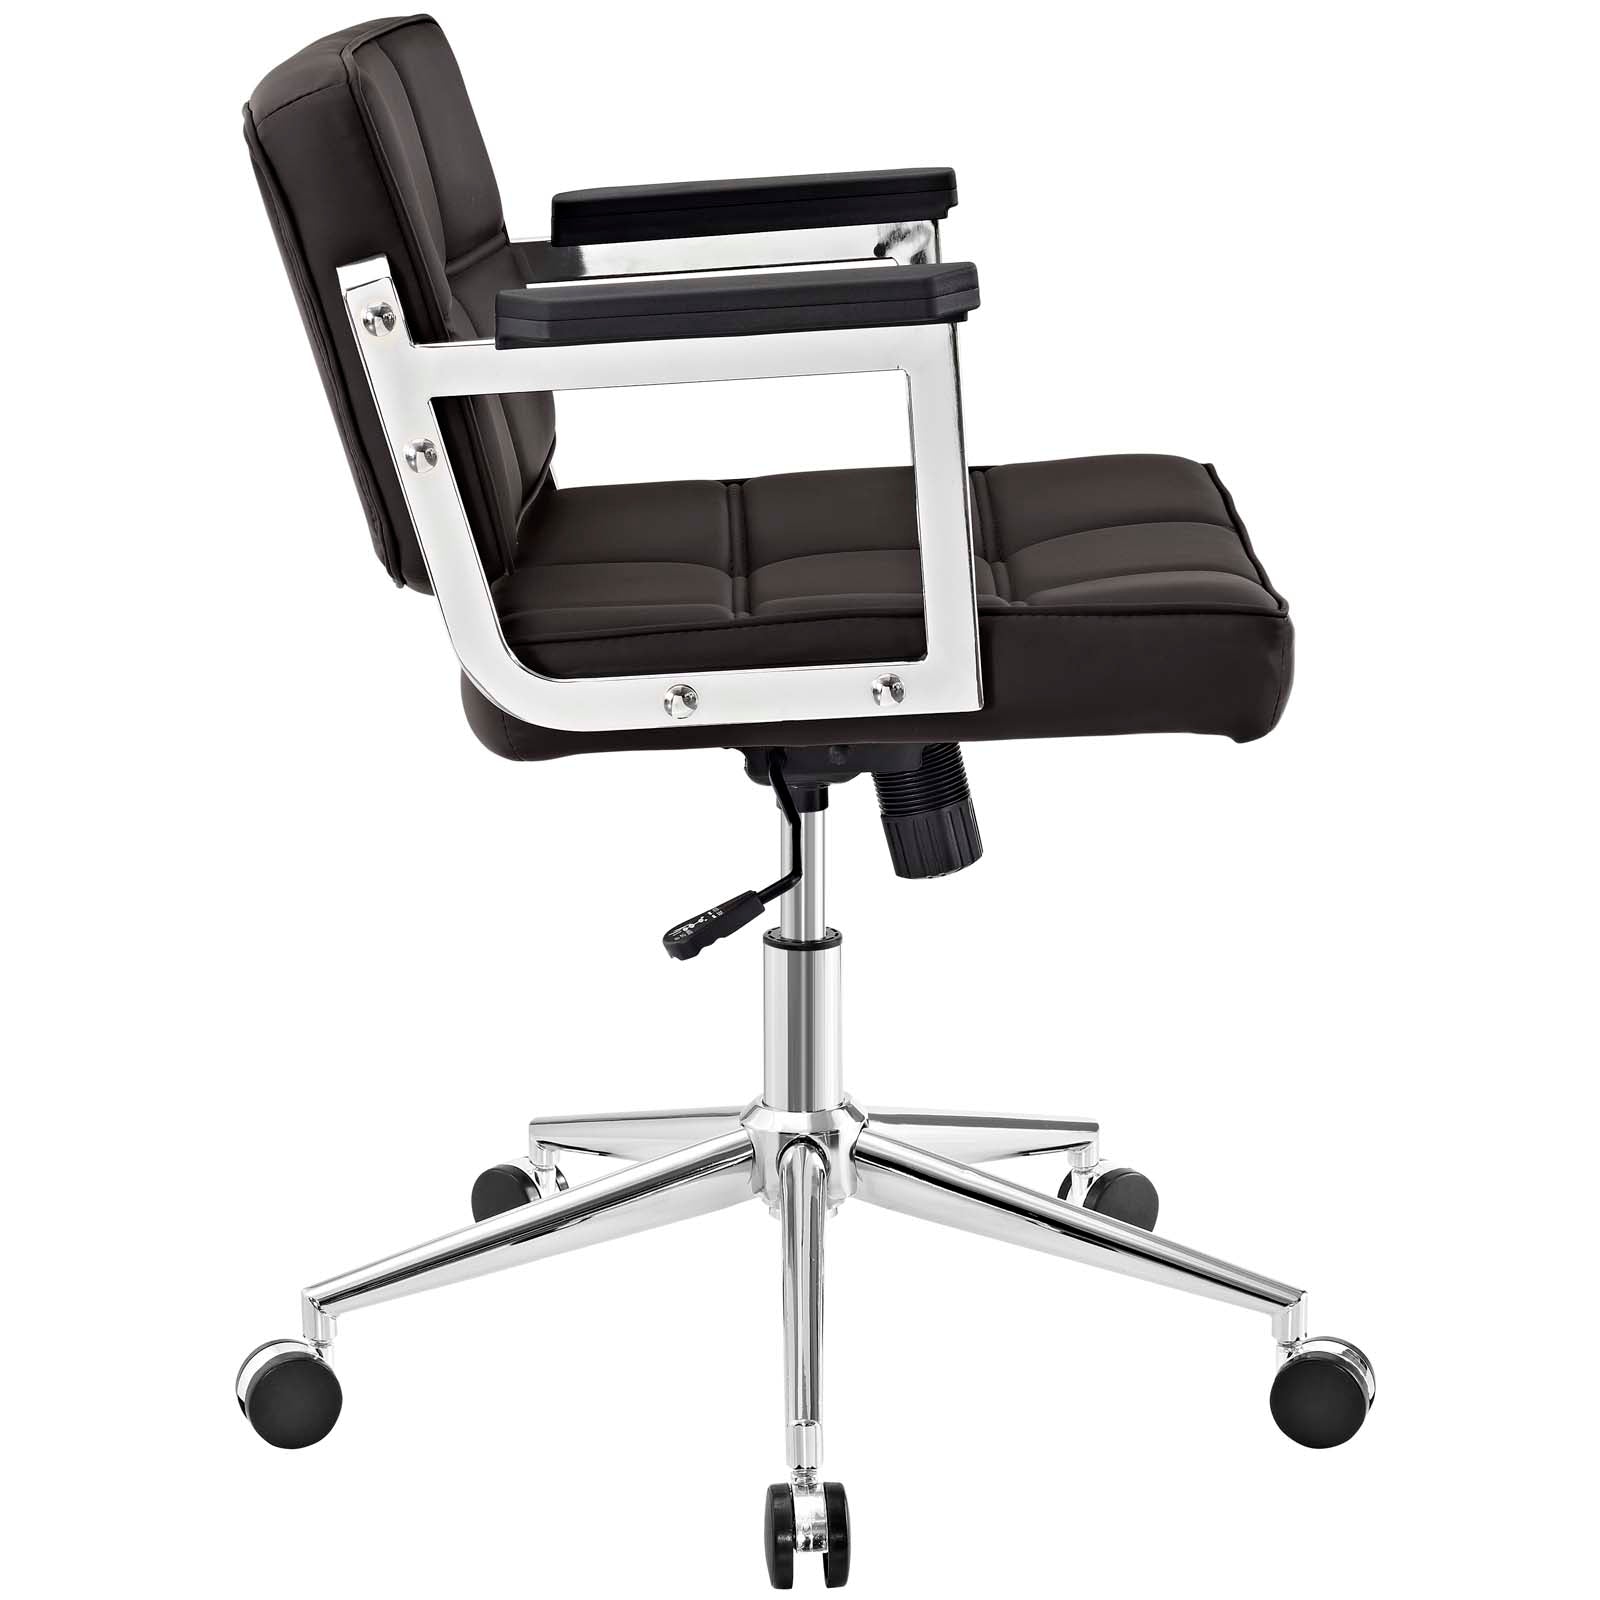 Modway Task Chairs - Portray Mid Back Upholstered Vinyl Office Chair Brown